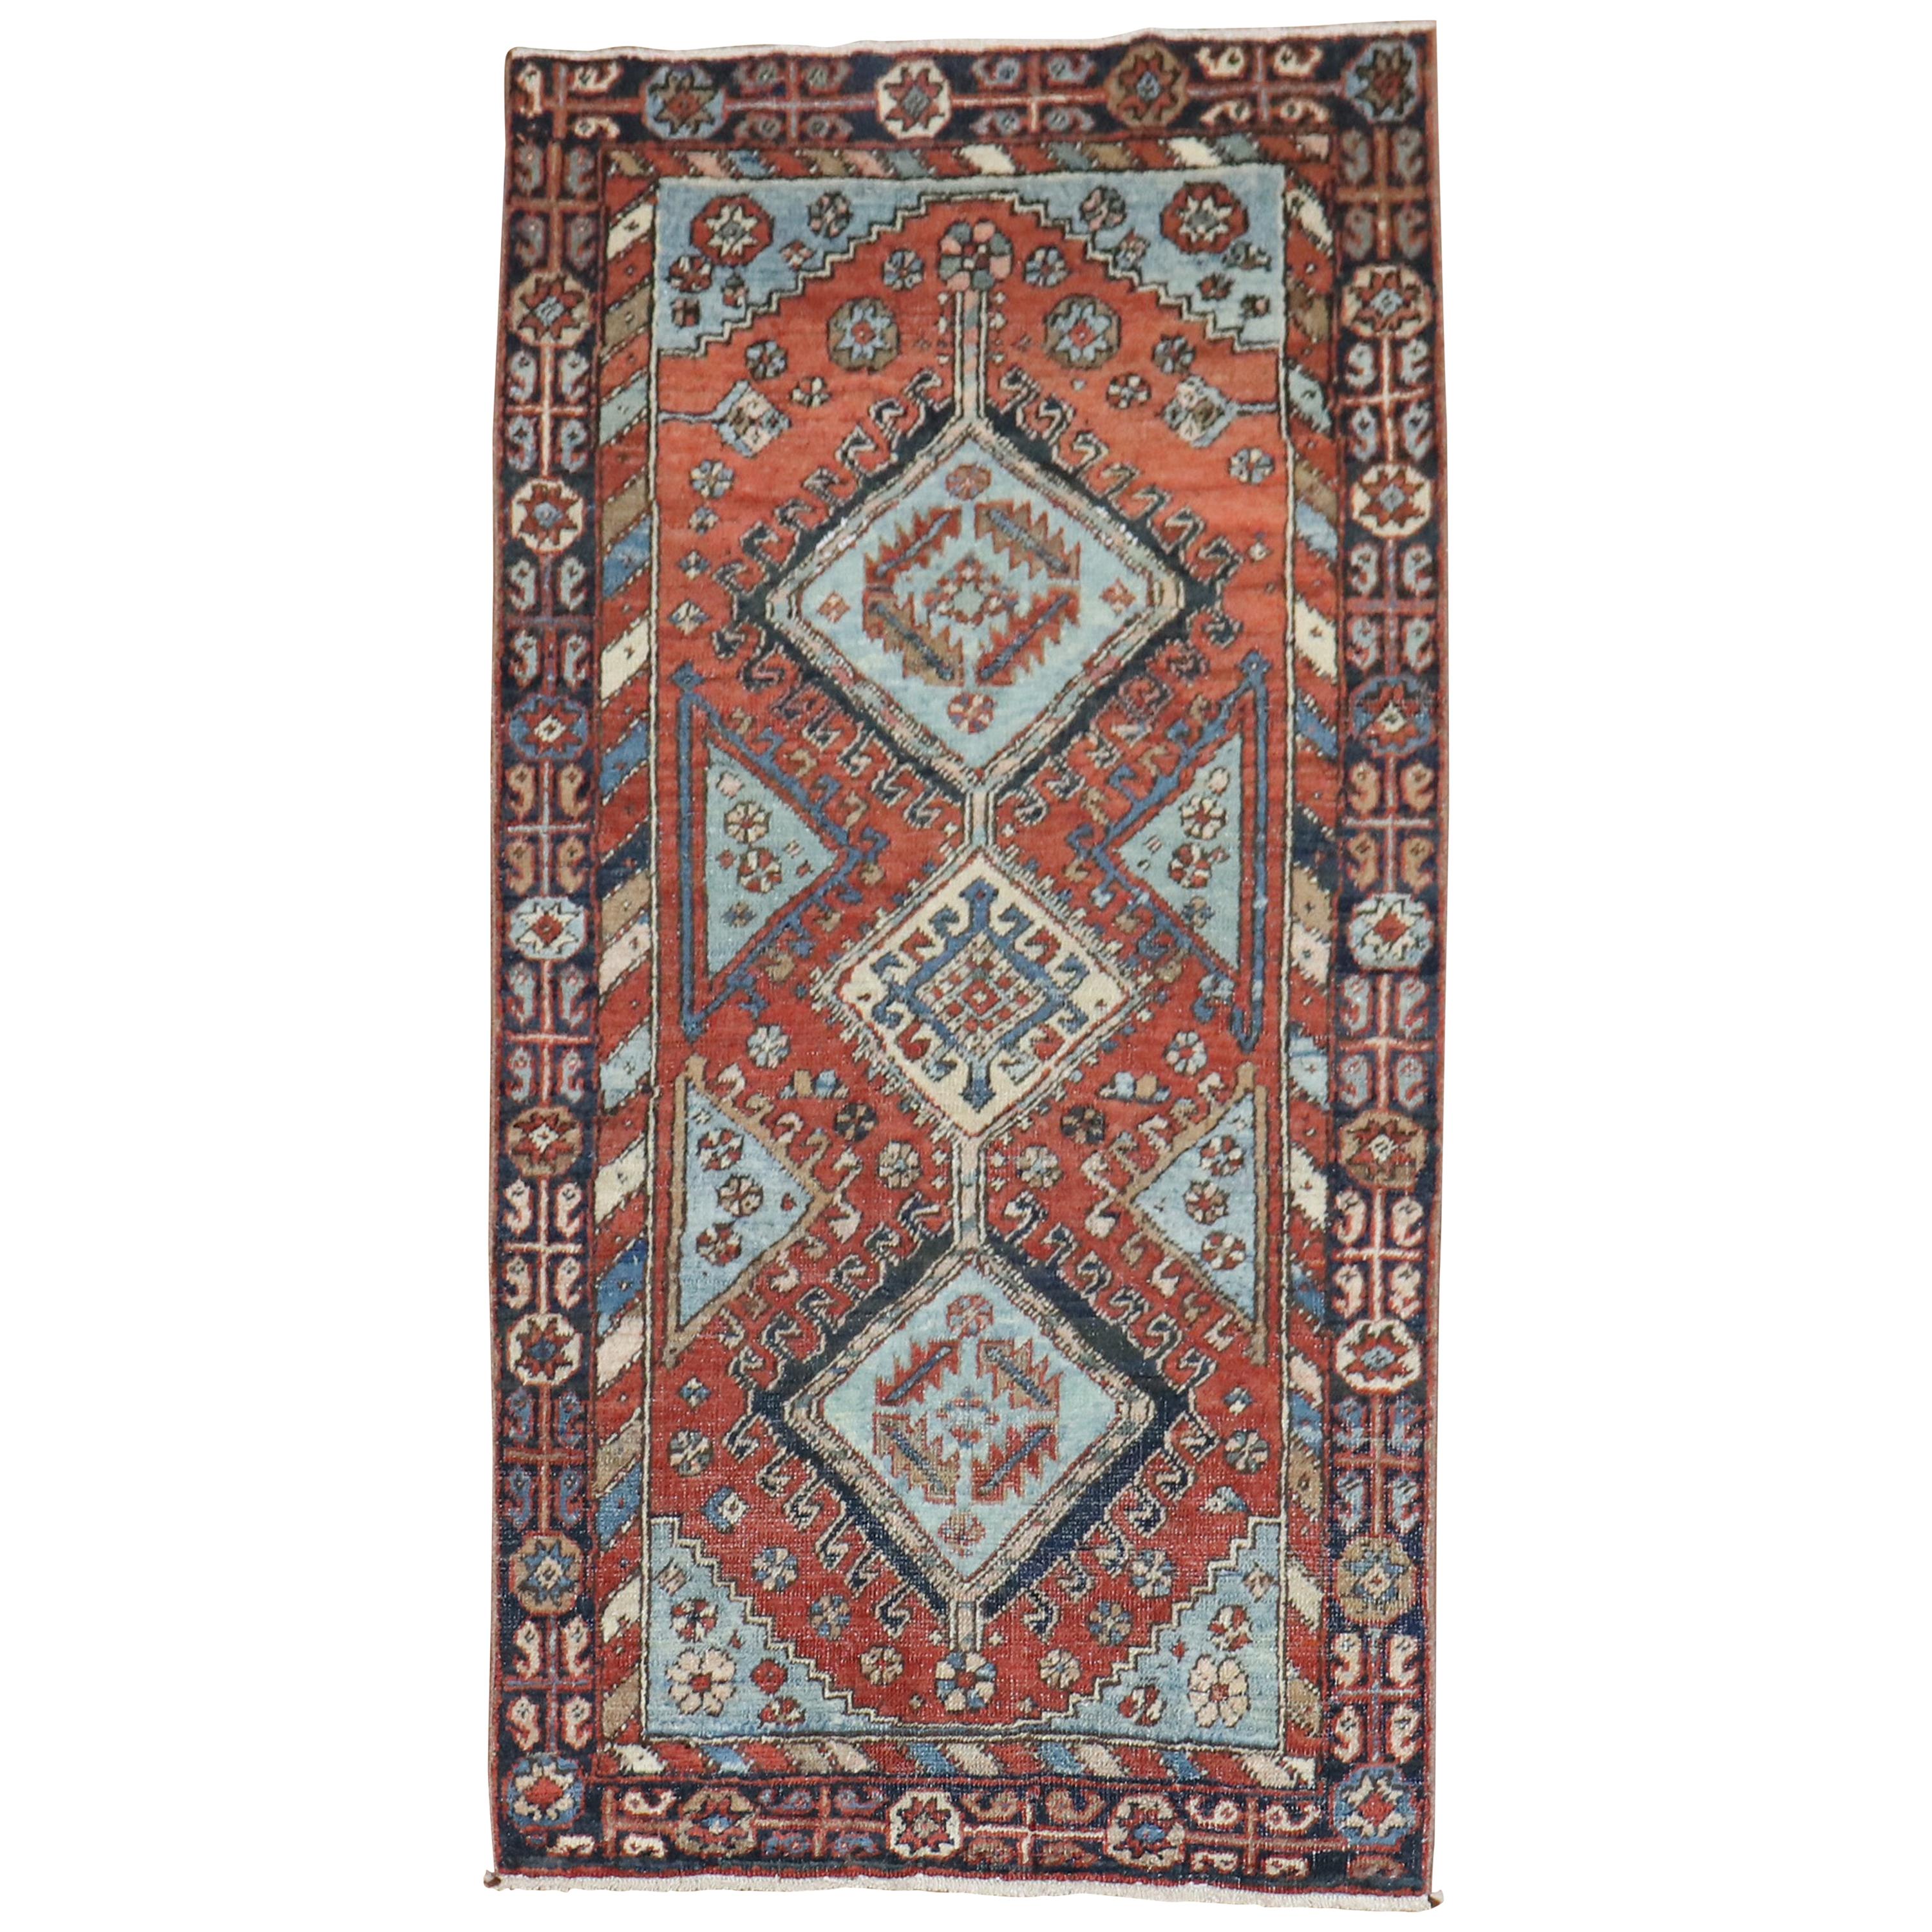 Tribal Rustic Persian Heriz Scatter Rug, Early 20th Century